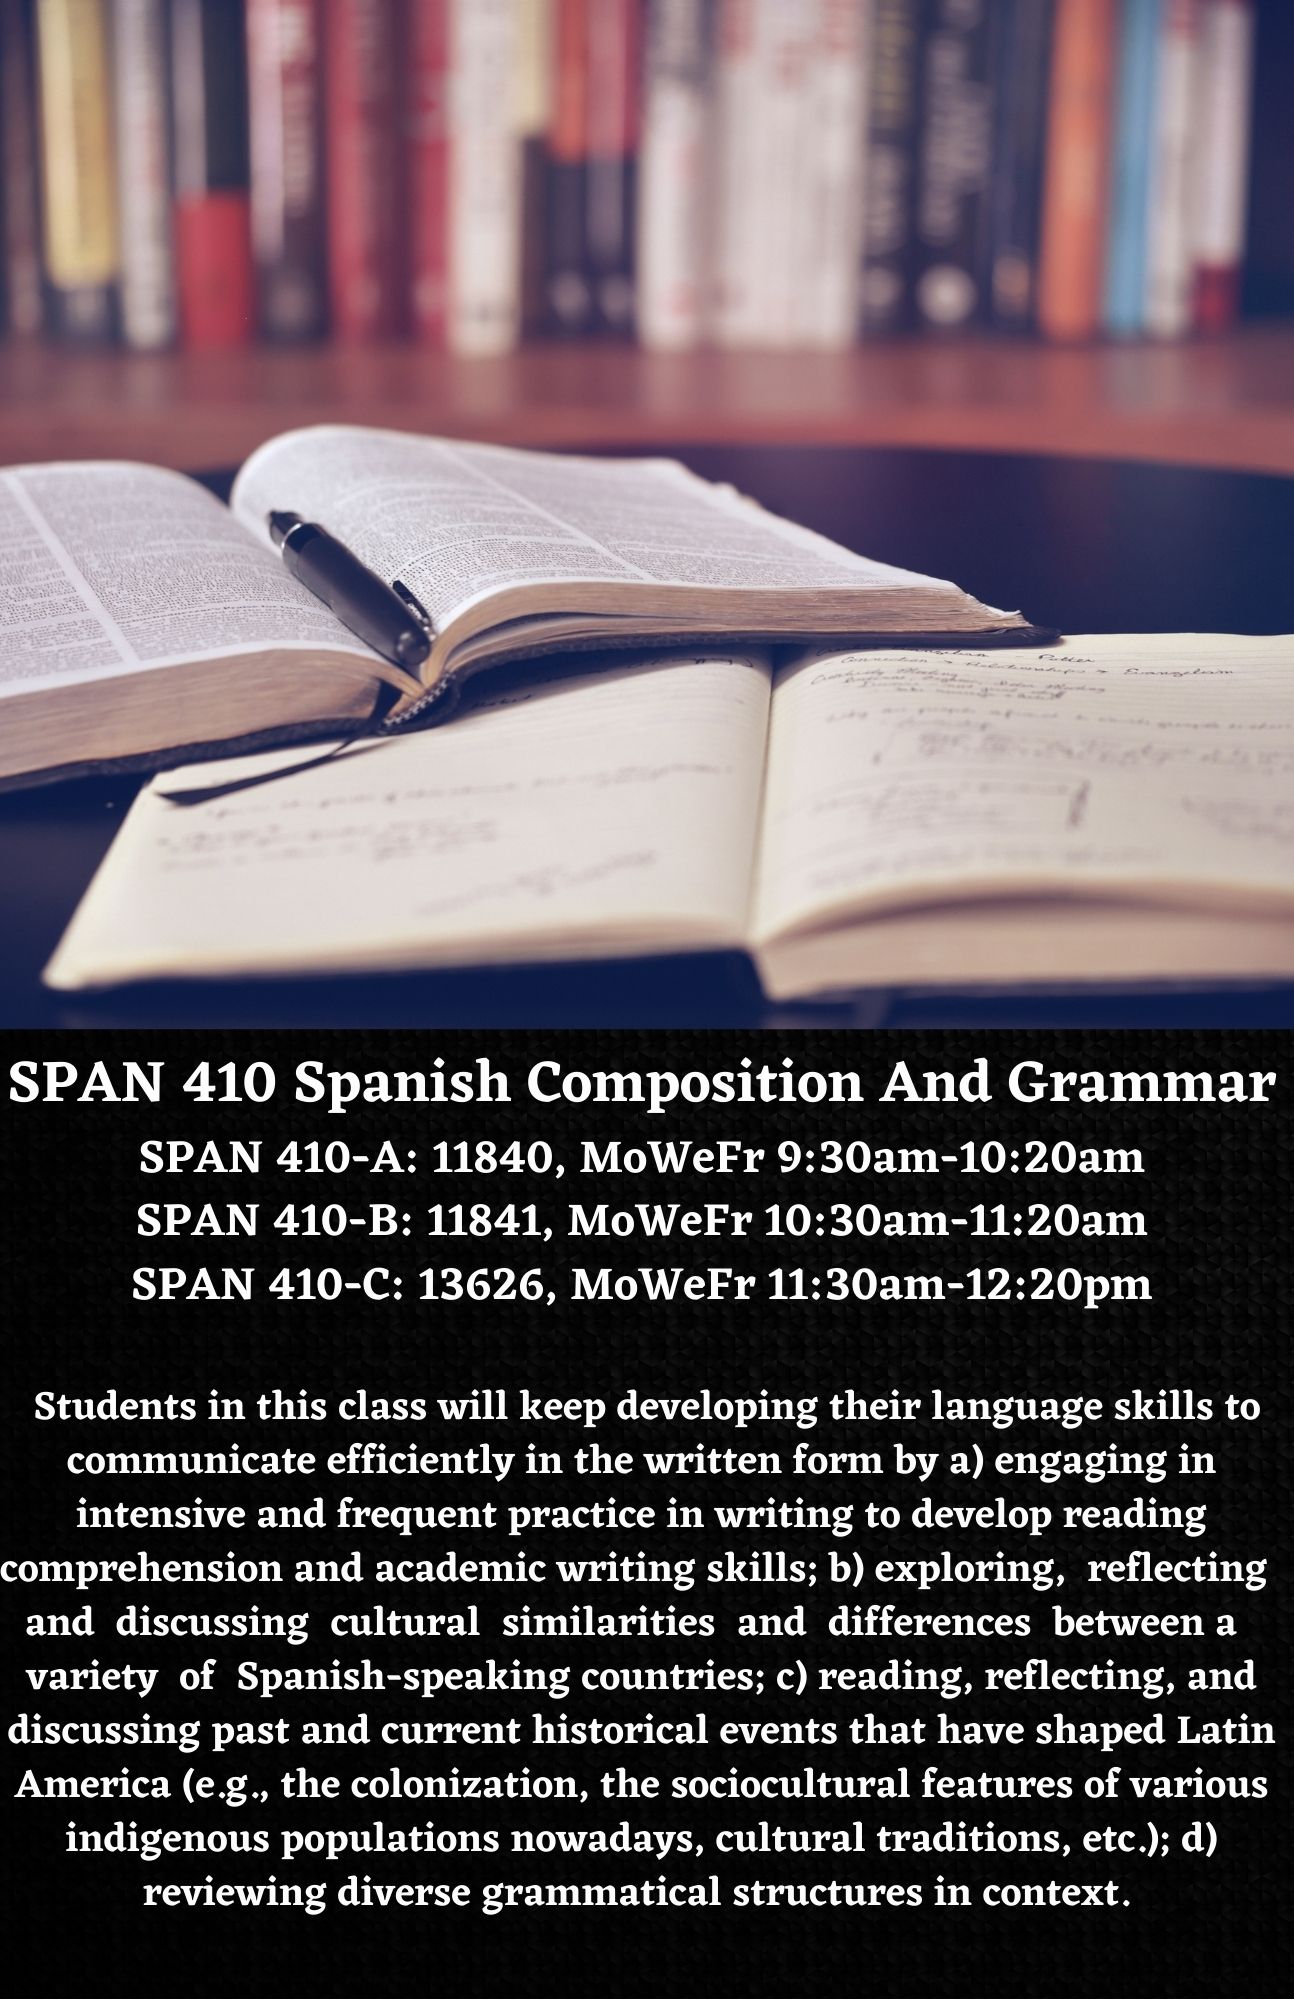 SPAN 420 - Spanish Conversation SPAN 420-A: 13856, MoWeFr 12:30pm-1:20pm SPAN 420-B: 13857, MoWeFr 1:30pm-2:20pm   The students in this class will keep developing their language skills to efficiently orally communicate with others by a) engaging in intensive and frequent practice in conversation to develop listening and speaking skills; b) exploring, reflecting and discussing cultural similarities and differences between the U.S. and a variety of Spanish-speaking countries through debates and cultural presentations; c) reading, reflecting, and discussing a wide variety of topics ranging from family relationships, to traditions, use and impact of technology, the environment, etc.; d) reviewing a wide range of grammatical structures in context. 